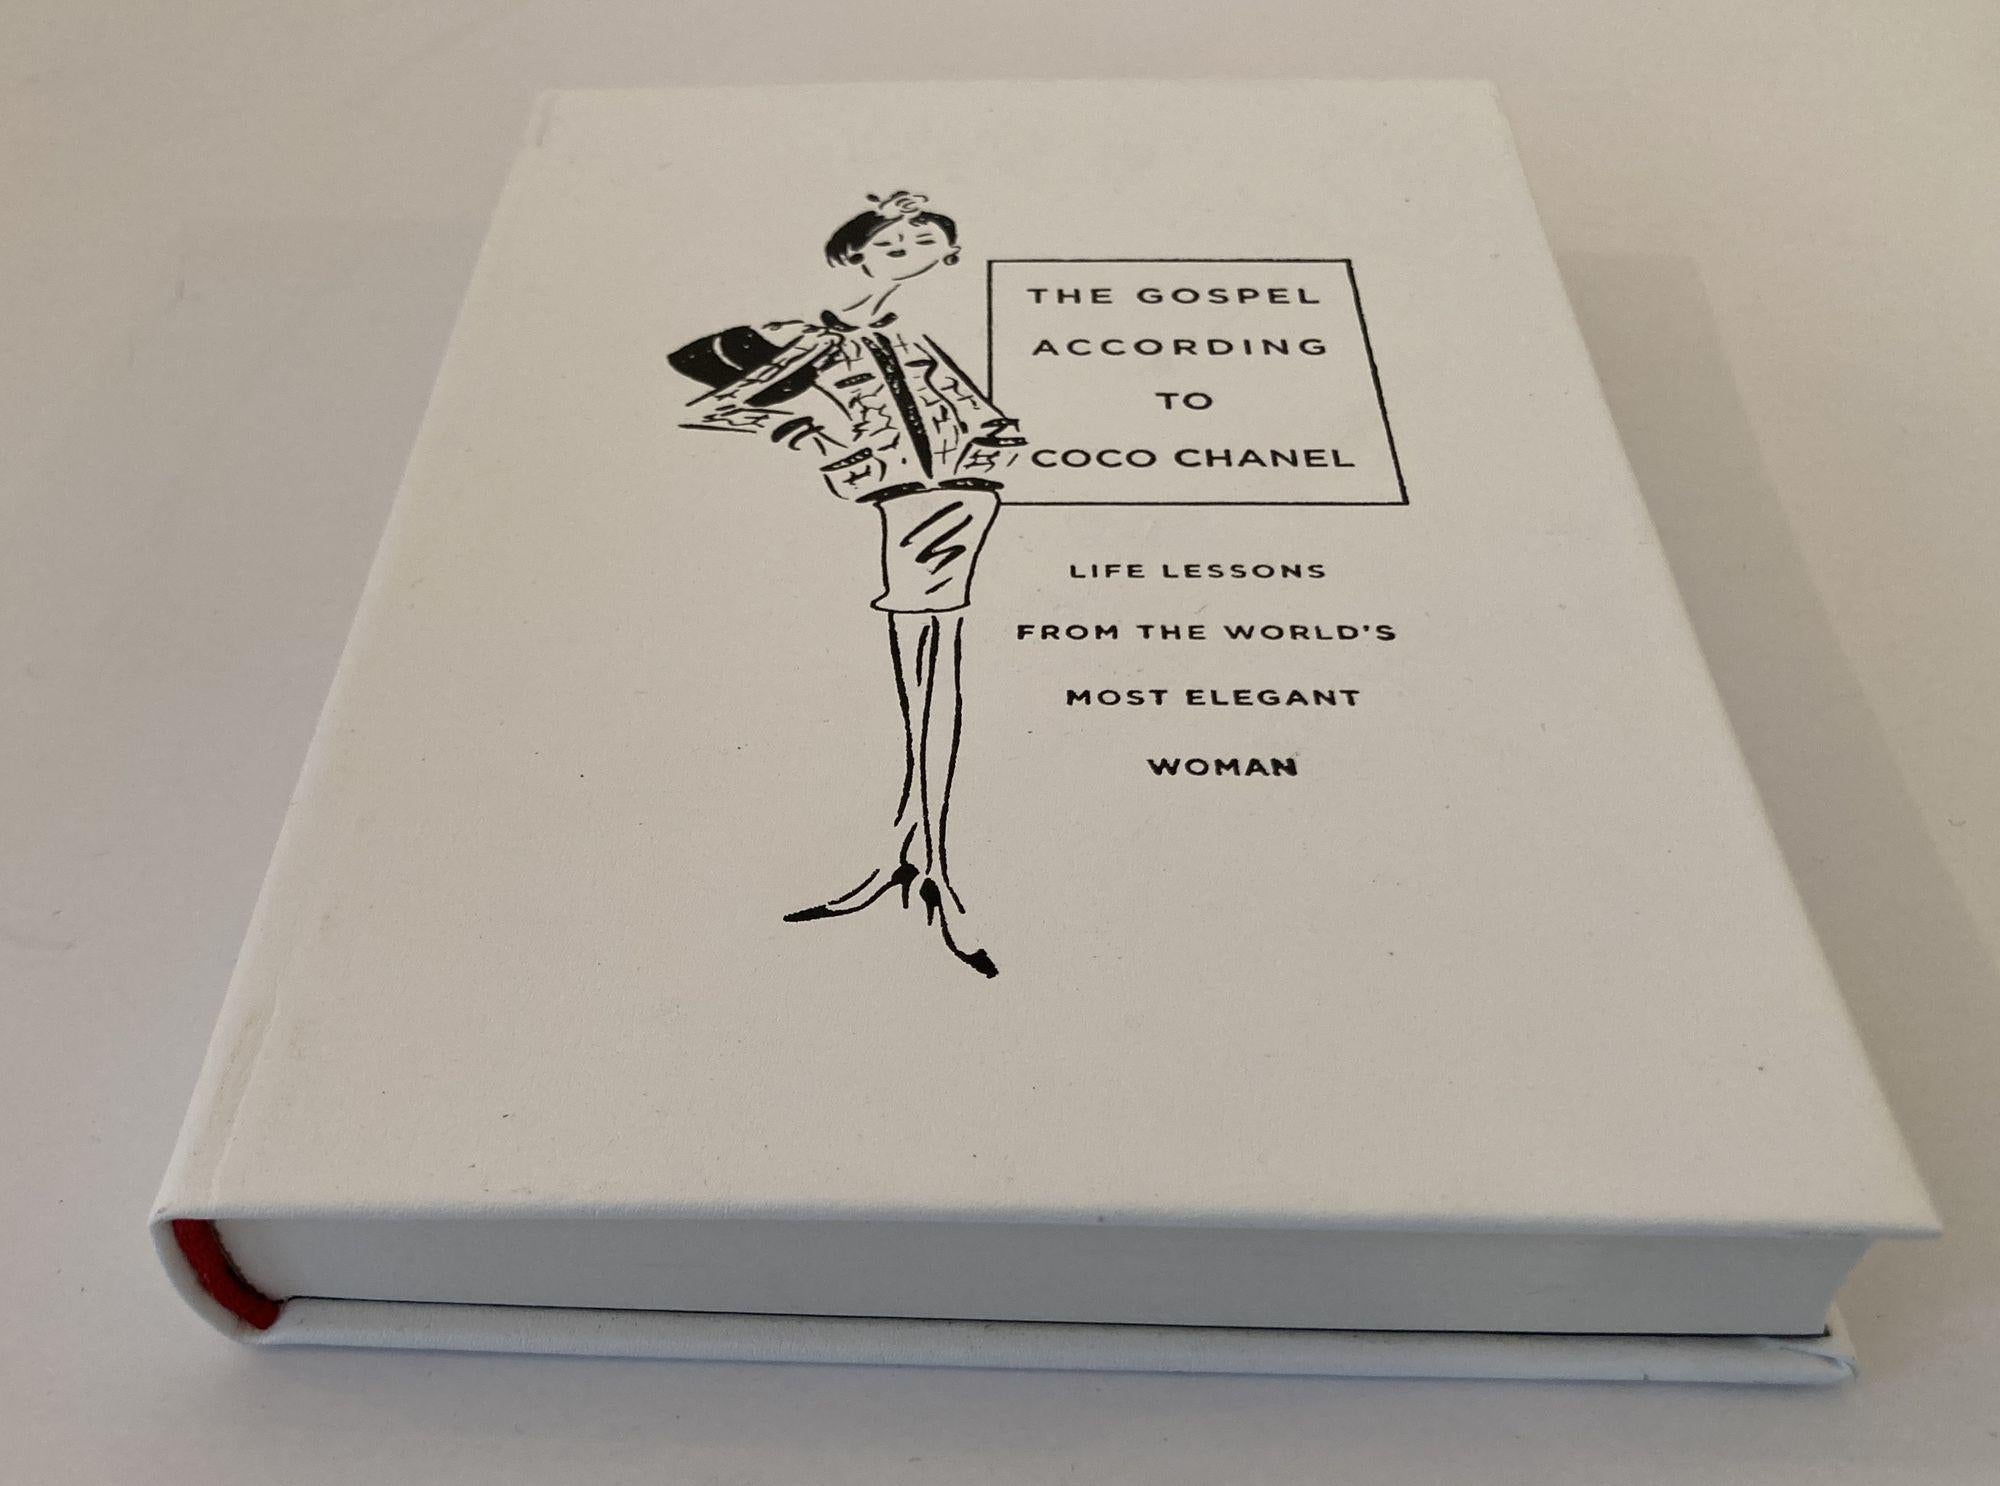 The Gospel According to Coco Chanel - Book. Written by Karen Karbo, this leather-bound book breaks down the key philosophies of the renowned Coco Chanel, life lessons from the world's most elegant woman, with topics touching on everything from money